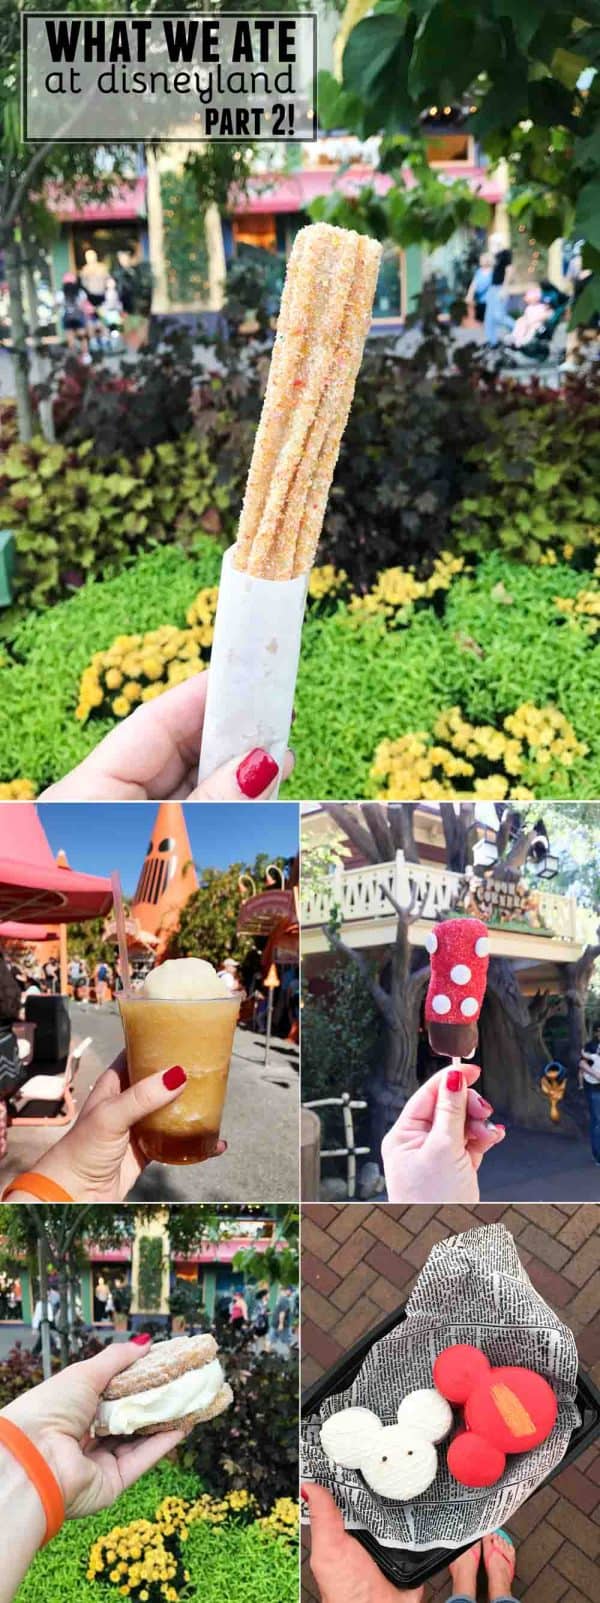 What We Ate at Disneyland - Part 2. Sweet, savory - and my recommendations for what to eat at Disneyland!